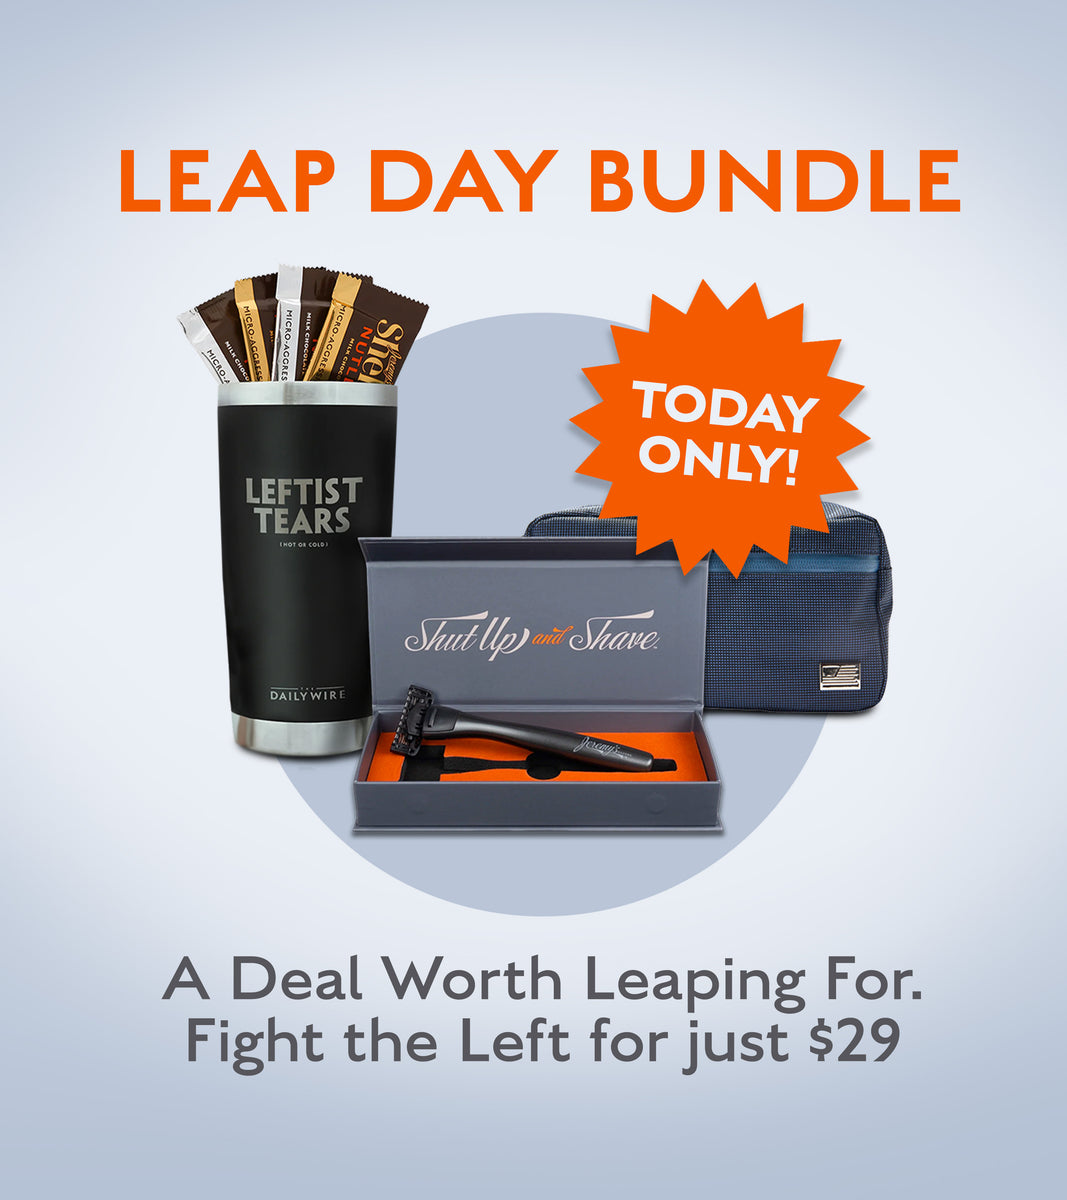 TODAY ONLY! Leap Day Bundle. A Deal Worth Leaping For. Fight the Left for just $29.